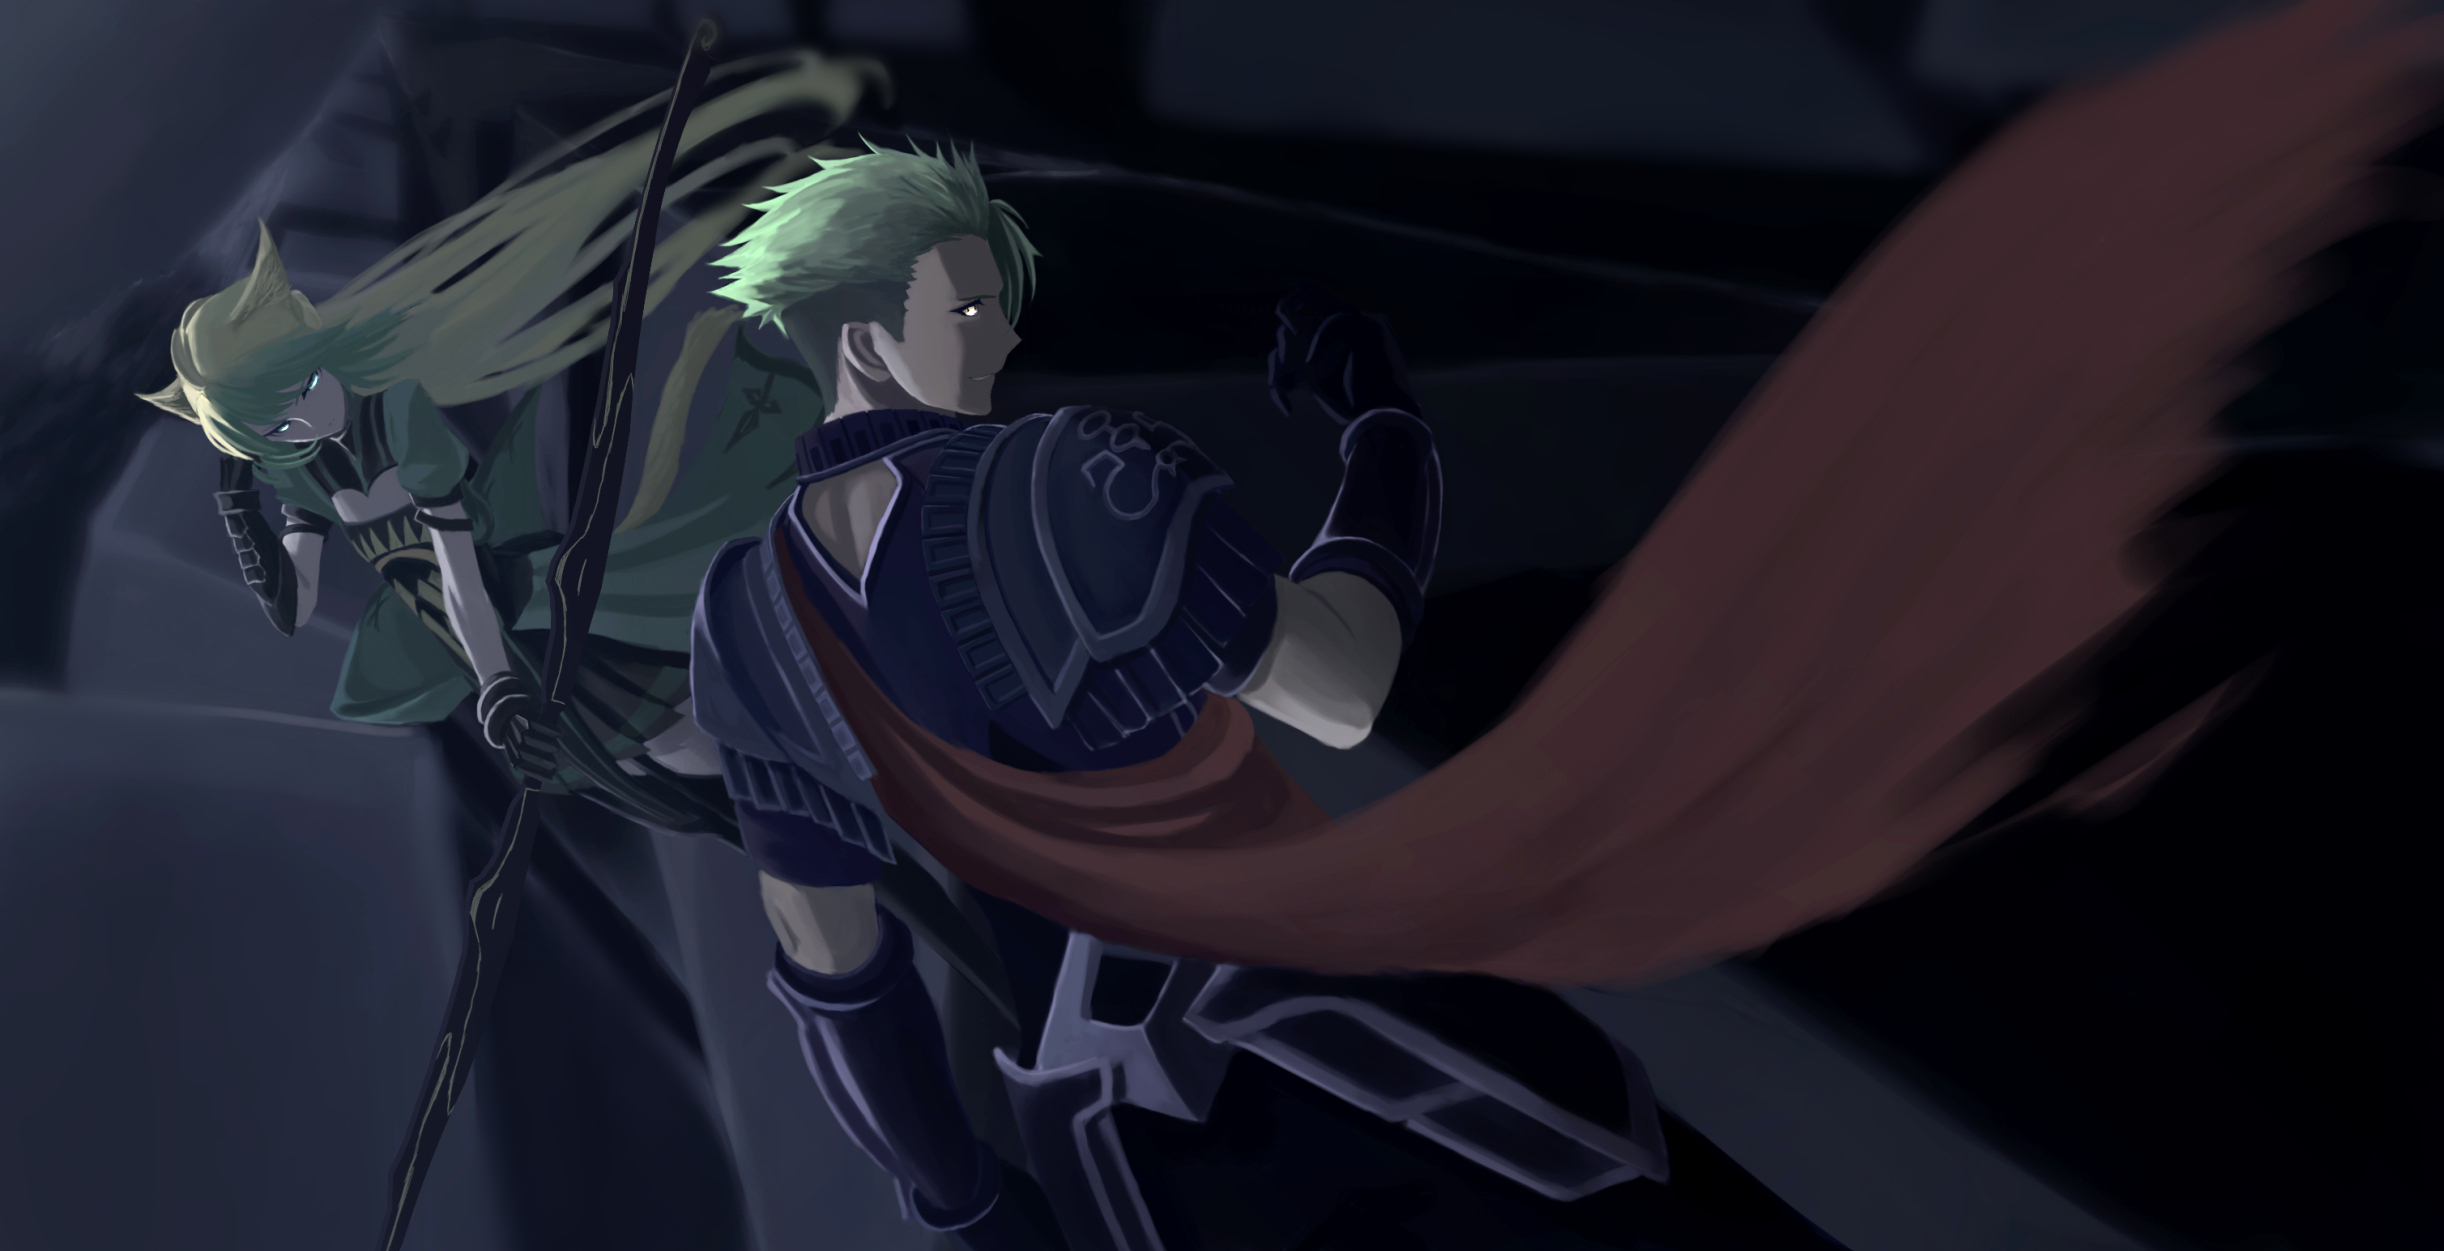 Achilles Fate Apocrypha Archer Of Red Fate Apocrypha Atalanta Fate Apocrypha Rider Of Red Fate Apocr Wallpaper Resolution 2444x1251 Id Wallha Com